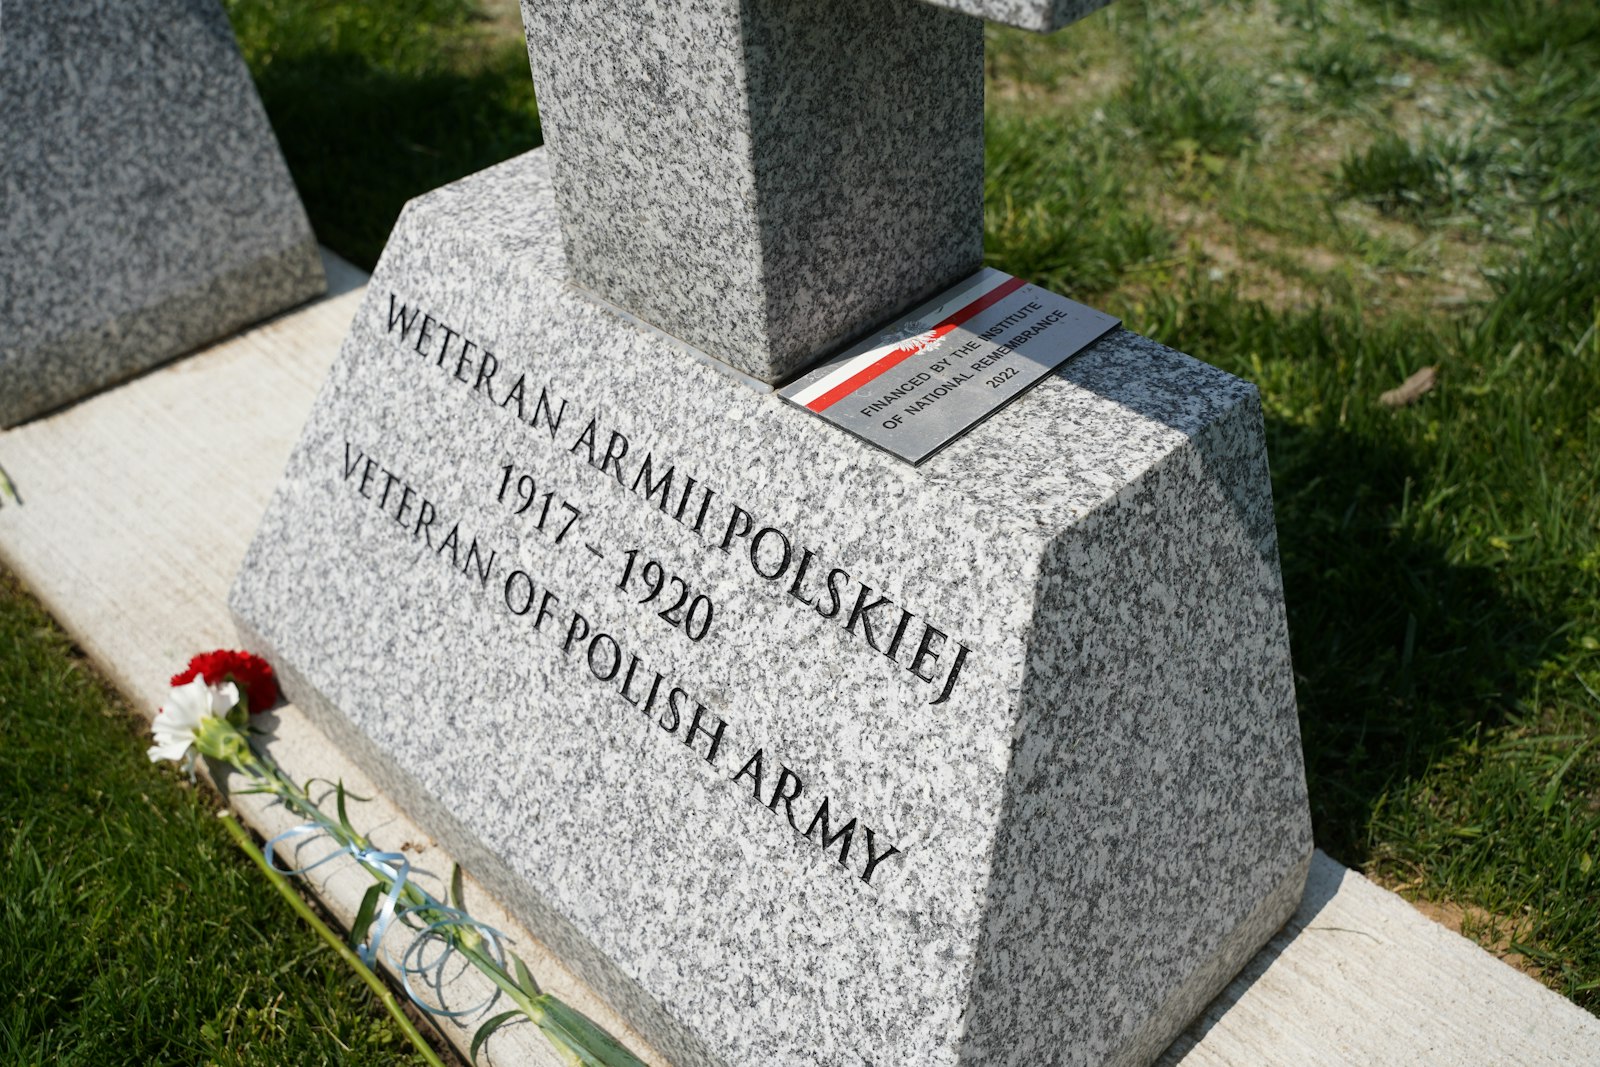 Volunteer Henrietta Nowakowski worked with the Polish Institute of Culture and Research at Orchard Lake Schools and the Polish government to identify the 59 Polish veterans who were buried at Holy Sepulchre.